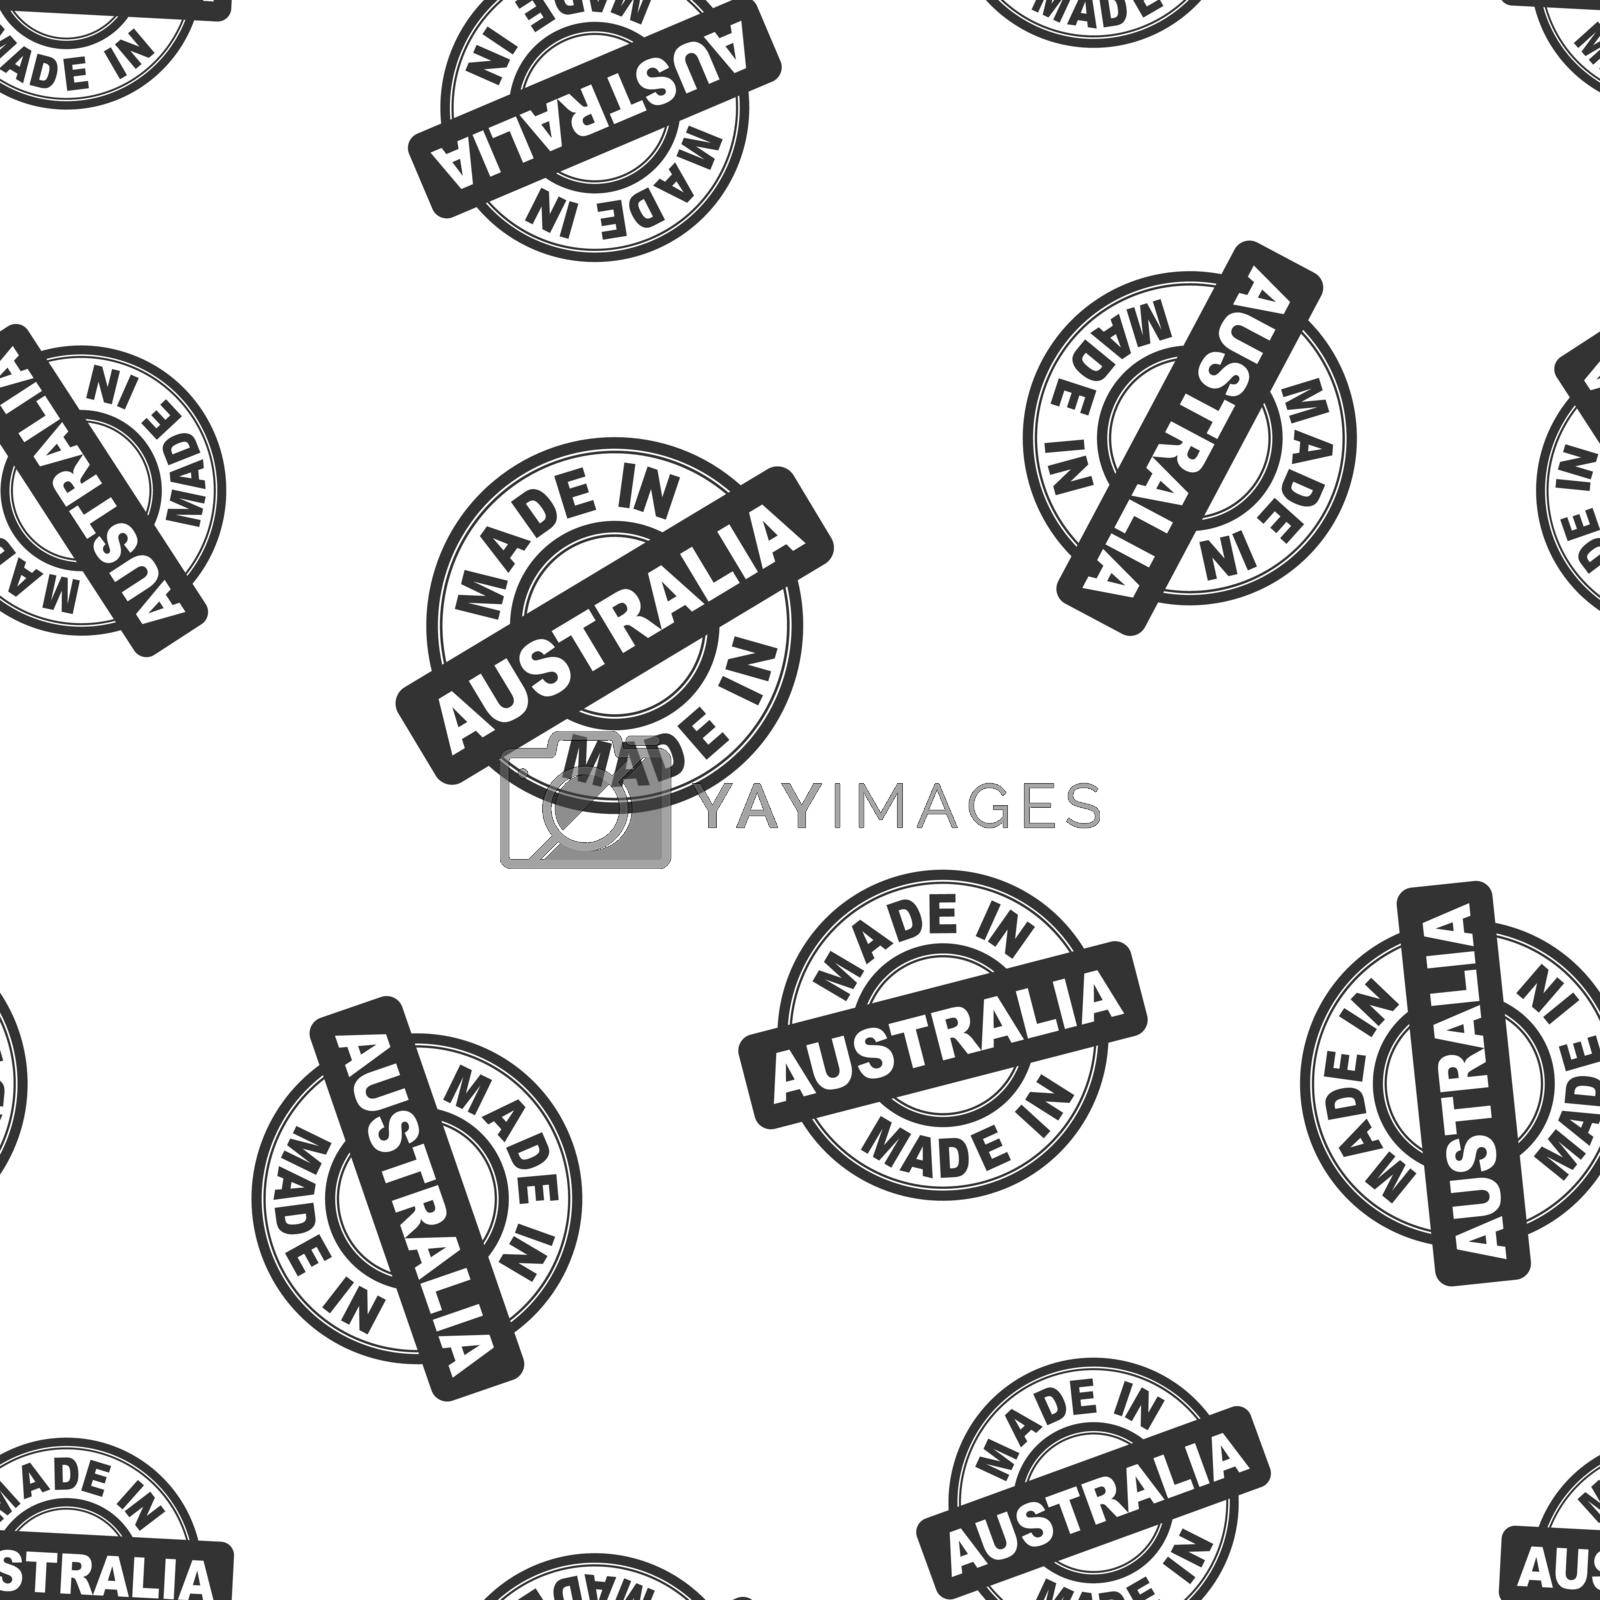 Royalty free image of Made in Australia stamp seamless pattern background. Business flat vector illustration. Manufactured in Australia symbol pattern. by LysenkoA